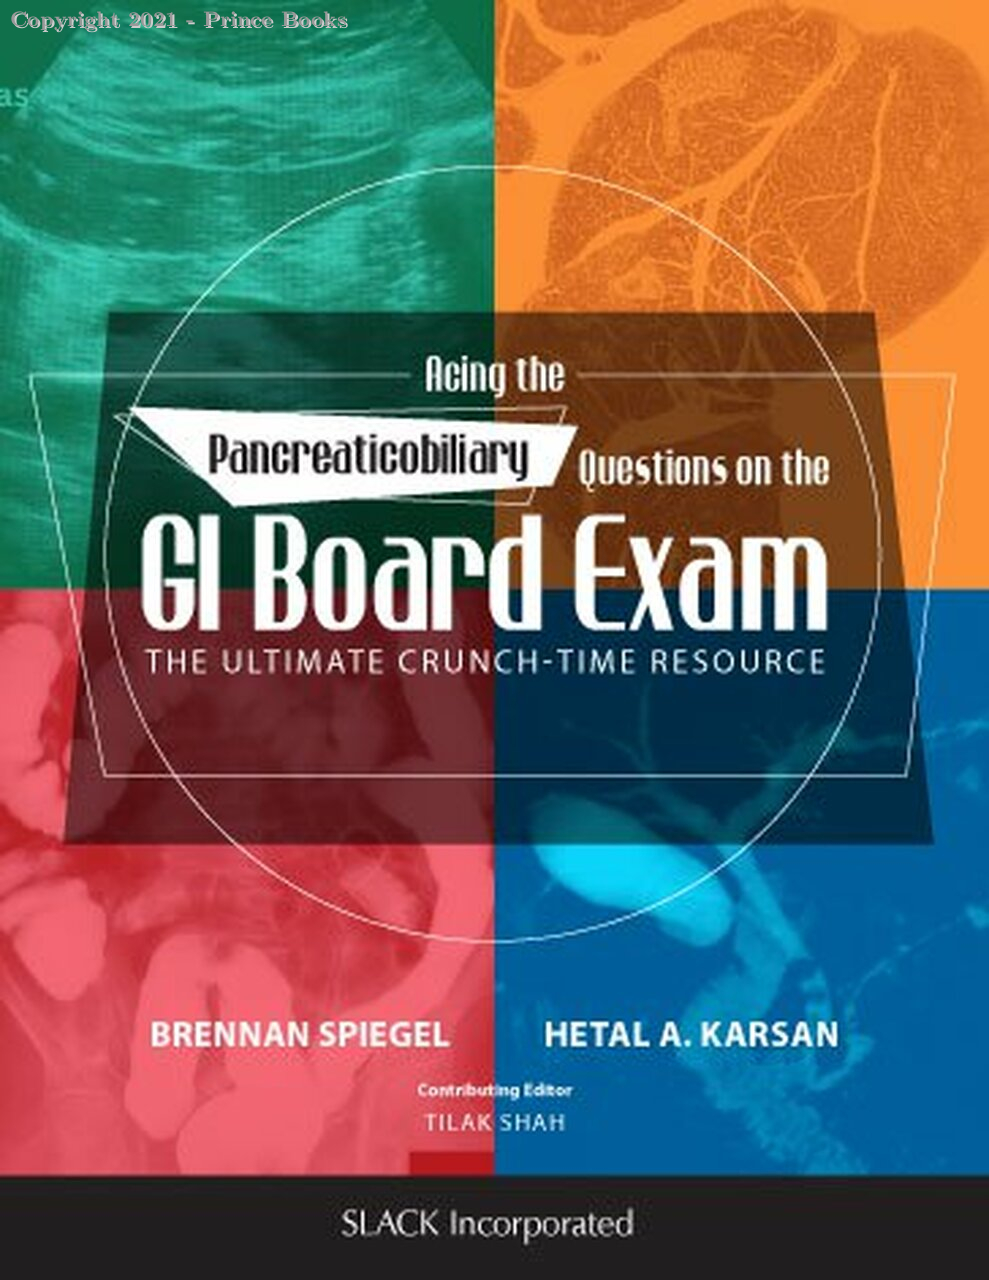 Acing the Pancreaticobiliary Questions on the GI Board Exam The Ultimate Crunch-Time Resource, 1e